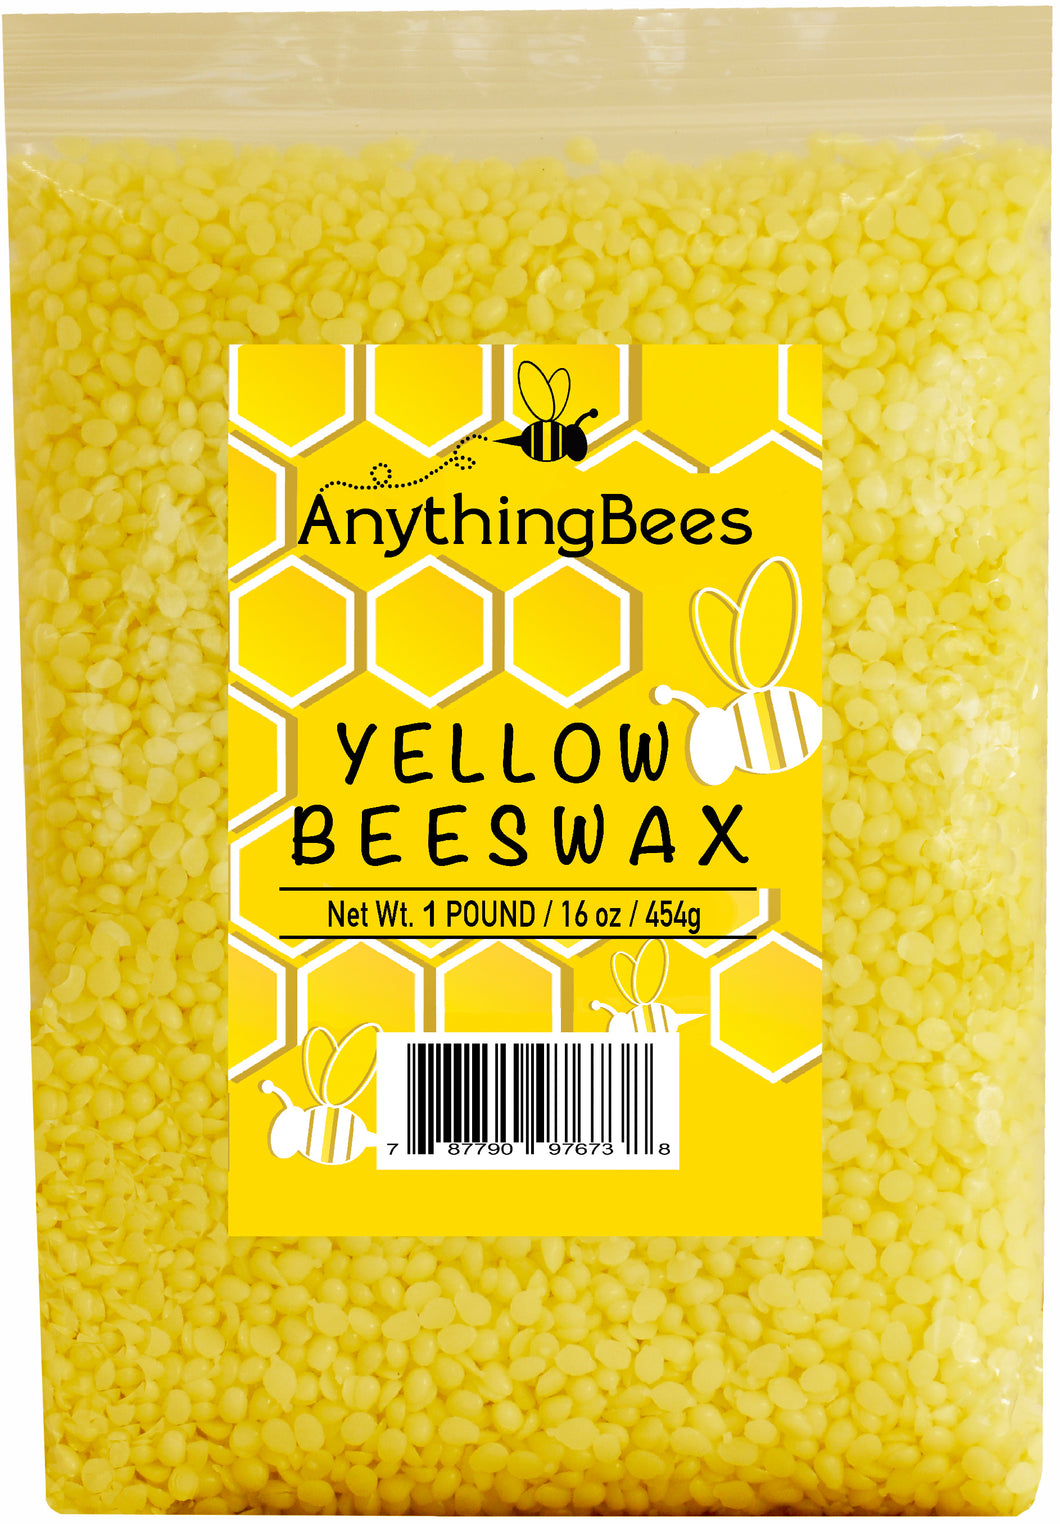 Organic Unrefined Yellow Beeswax Triple Filtered Pellets / Pastilles /  Beads. 500g - 25Kg Pack Sizes at Rs 495/kg, Beeswax in Delhi